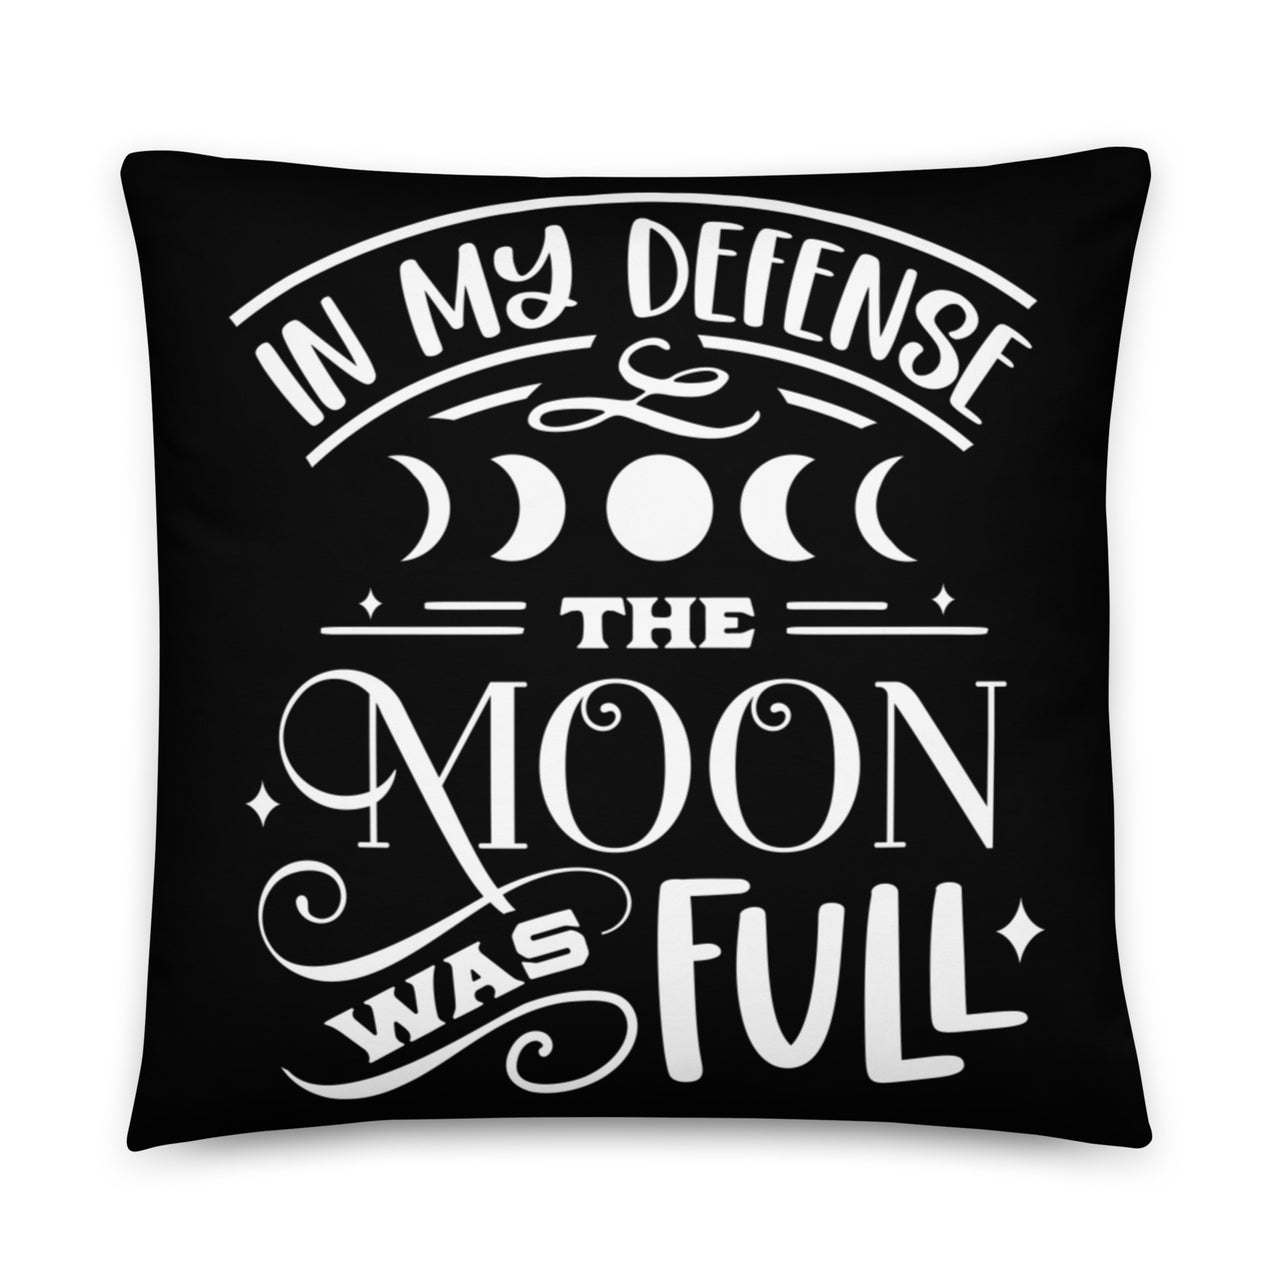 In My Defense the Moon Was Full Pillow